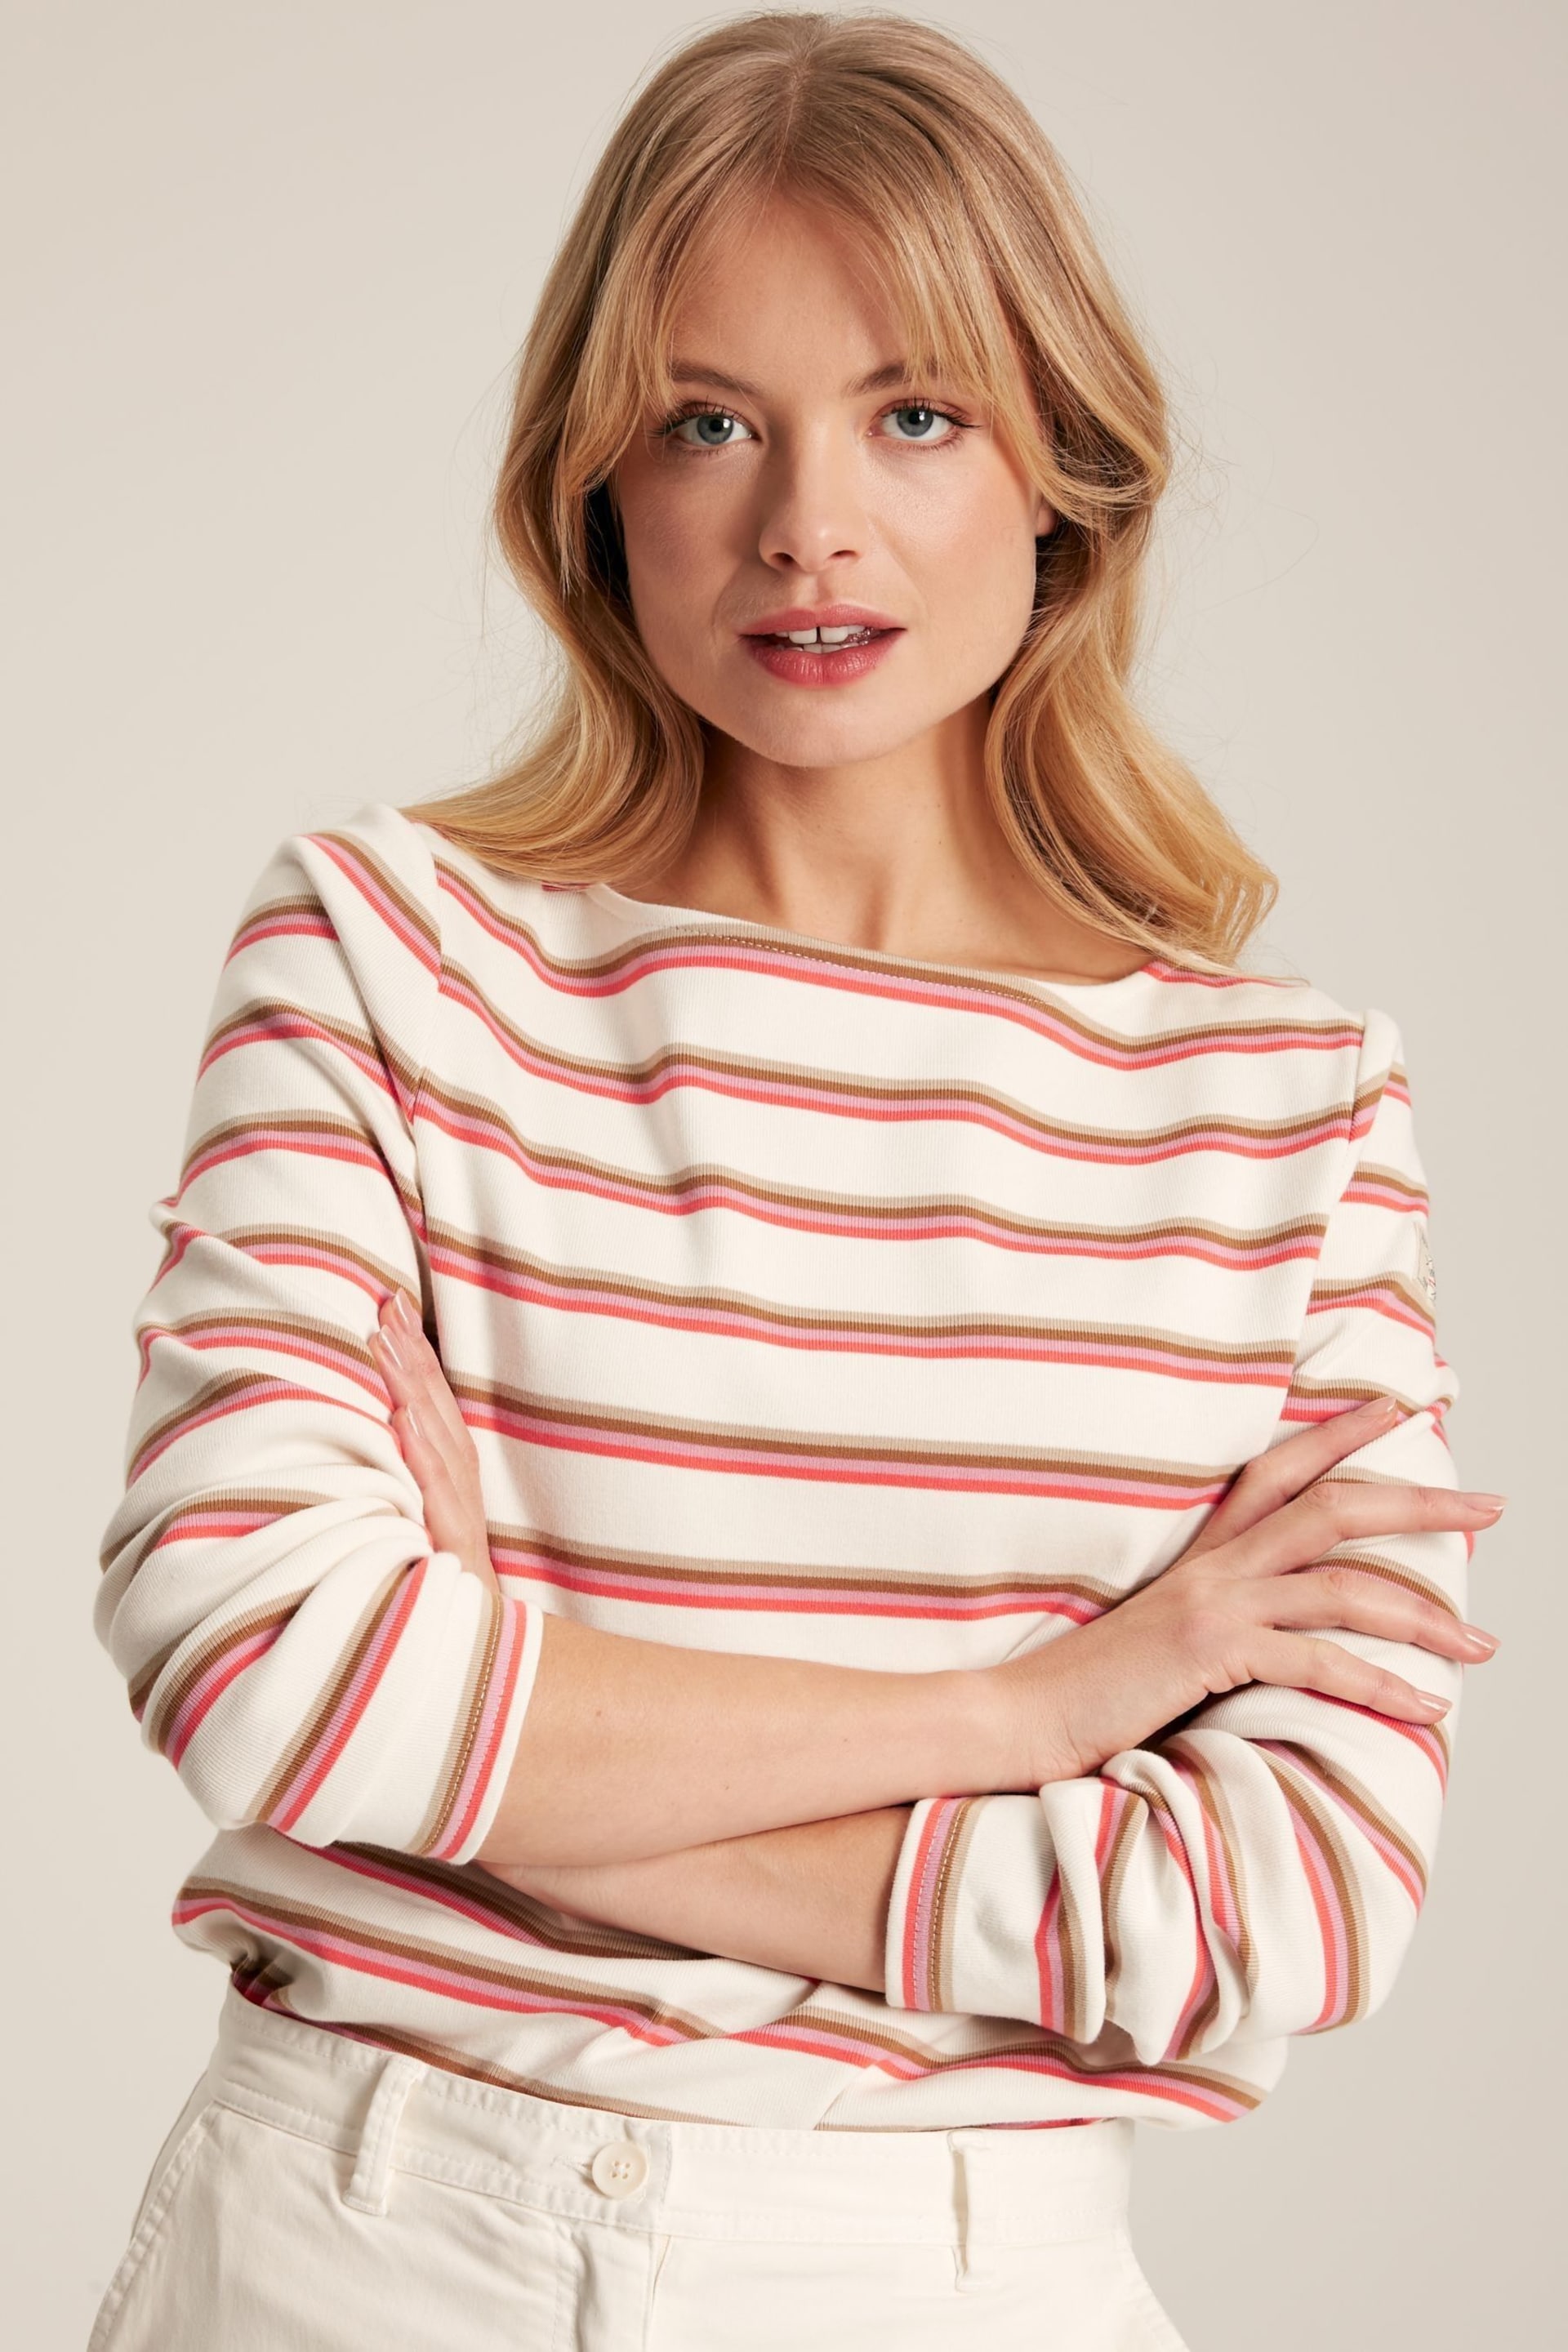 Joules New Harbour Pink & Tan Striped Boat Neck Breton Top - Image 1 of 6